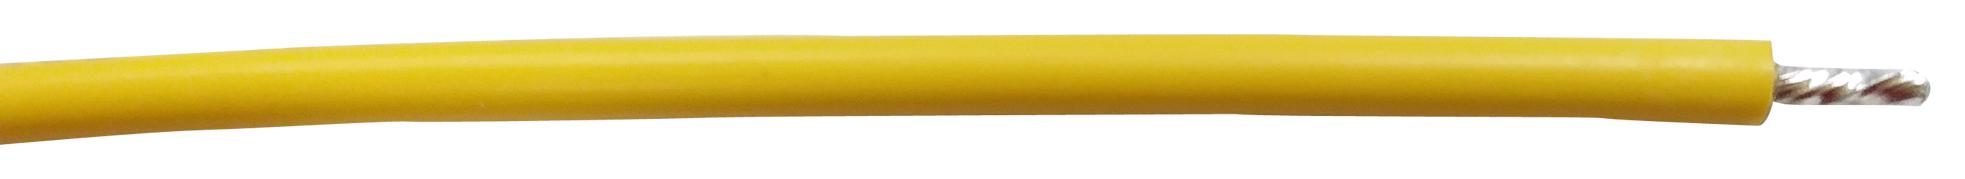 PP002352 HOOK-UP WIRE, 14AWG, YELLOW, 305M, 600V PRO POWER